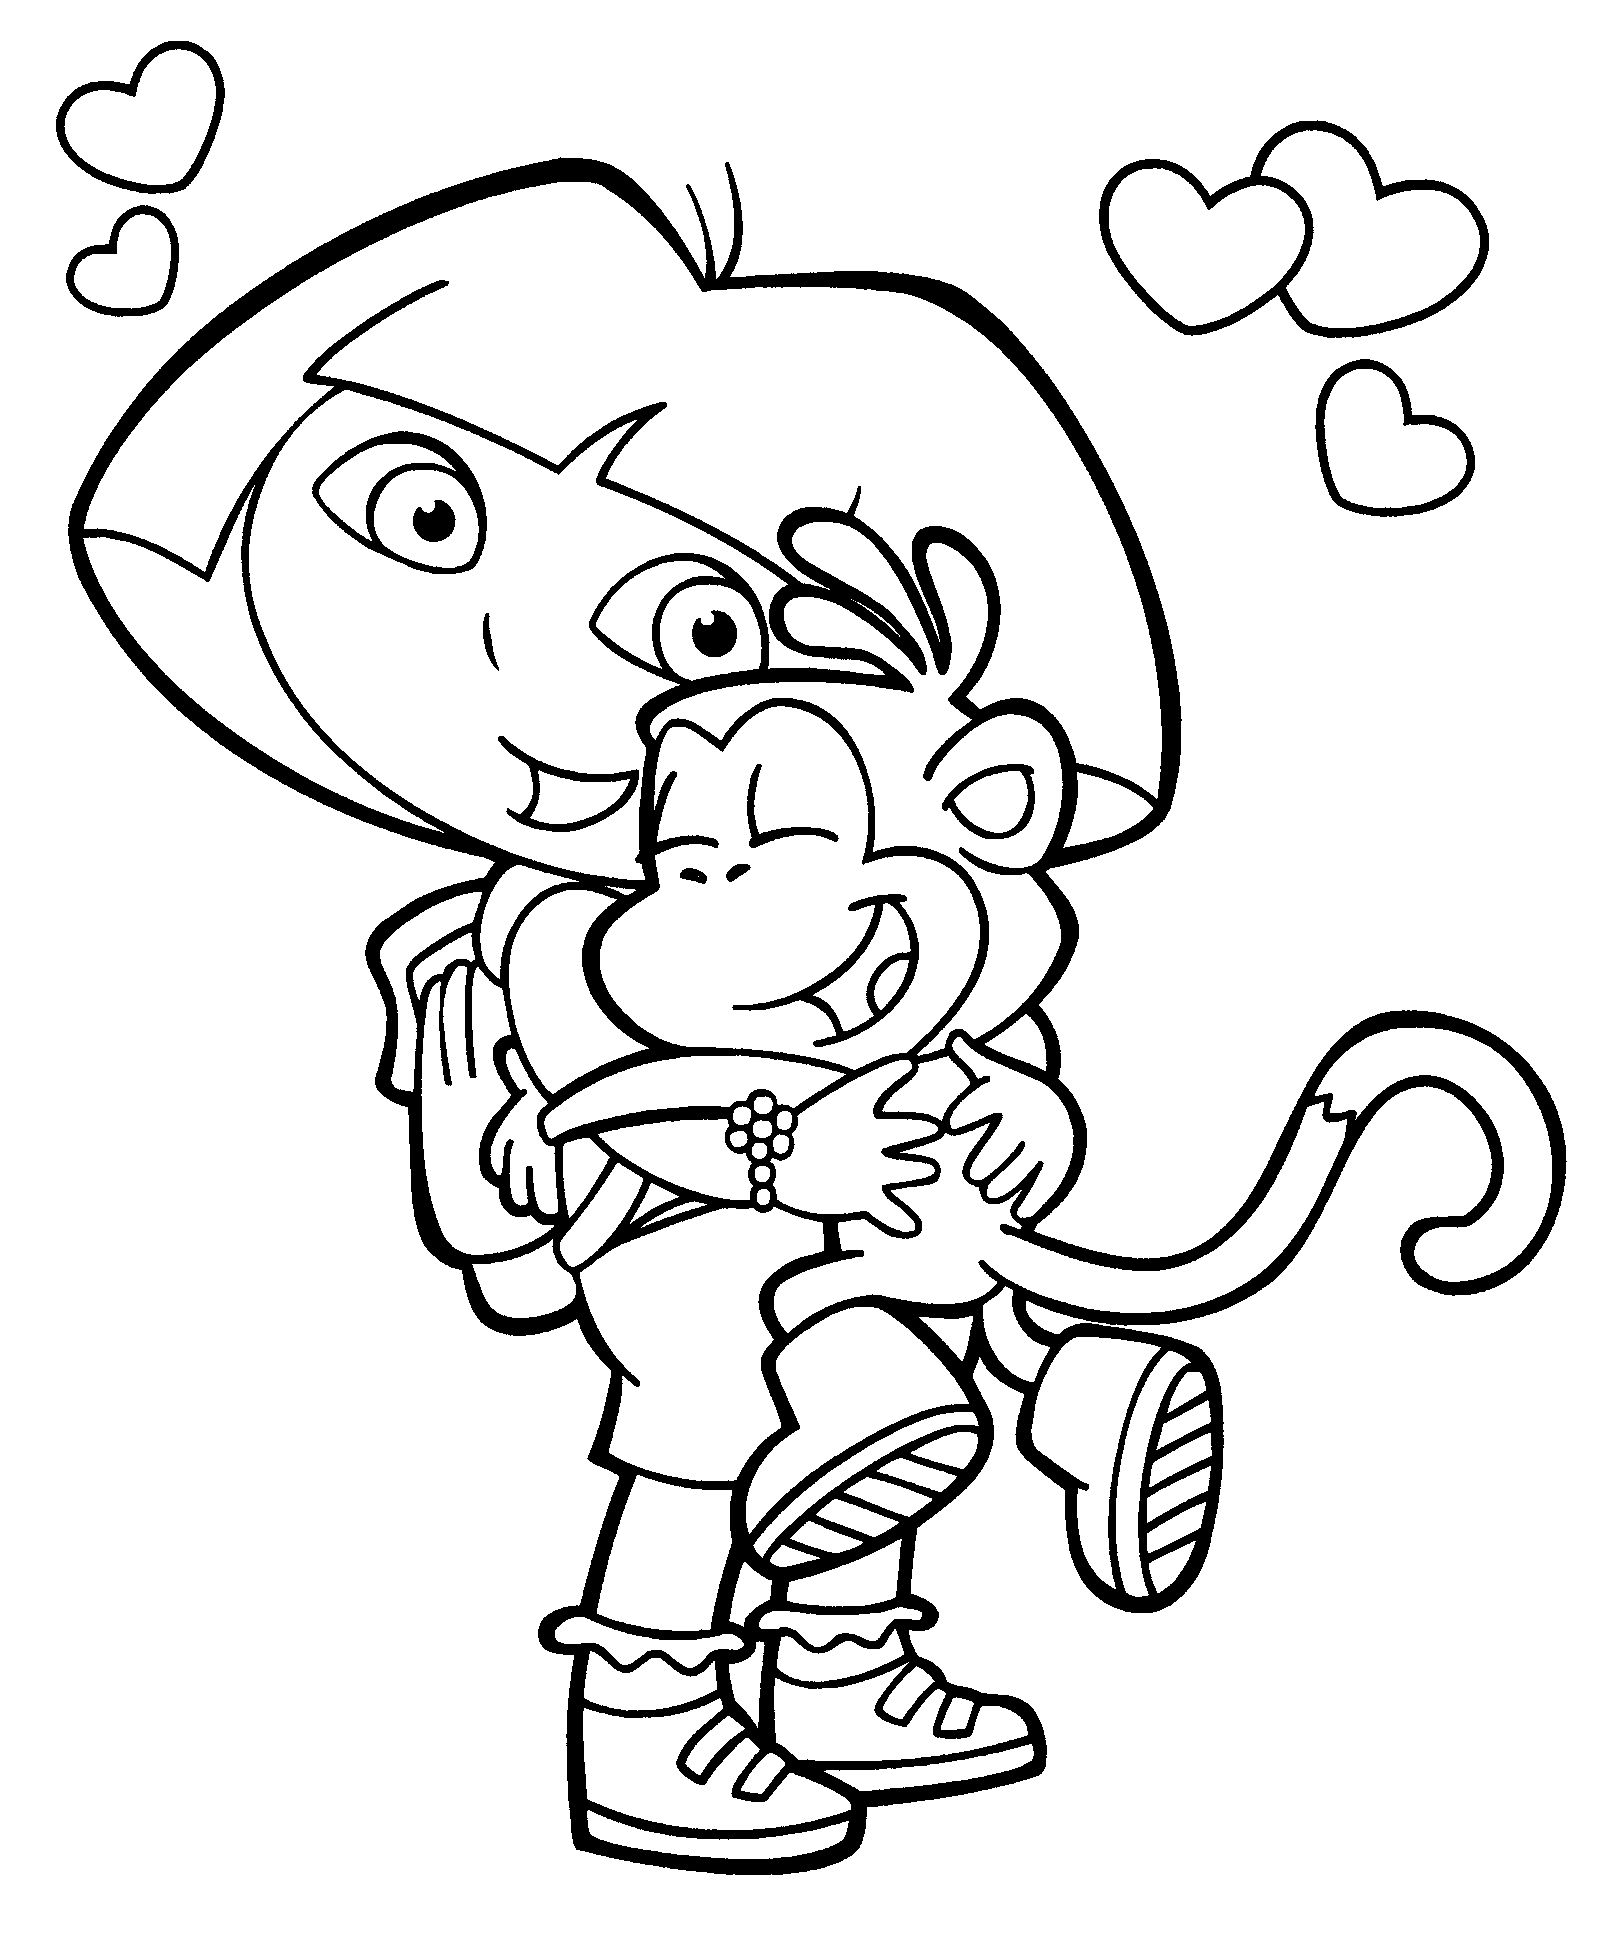 Dora Coloring Pages For Kids